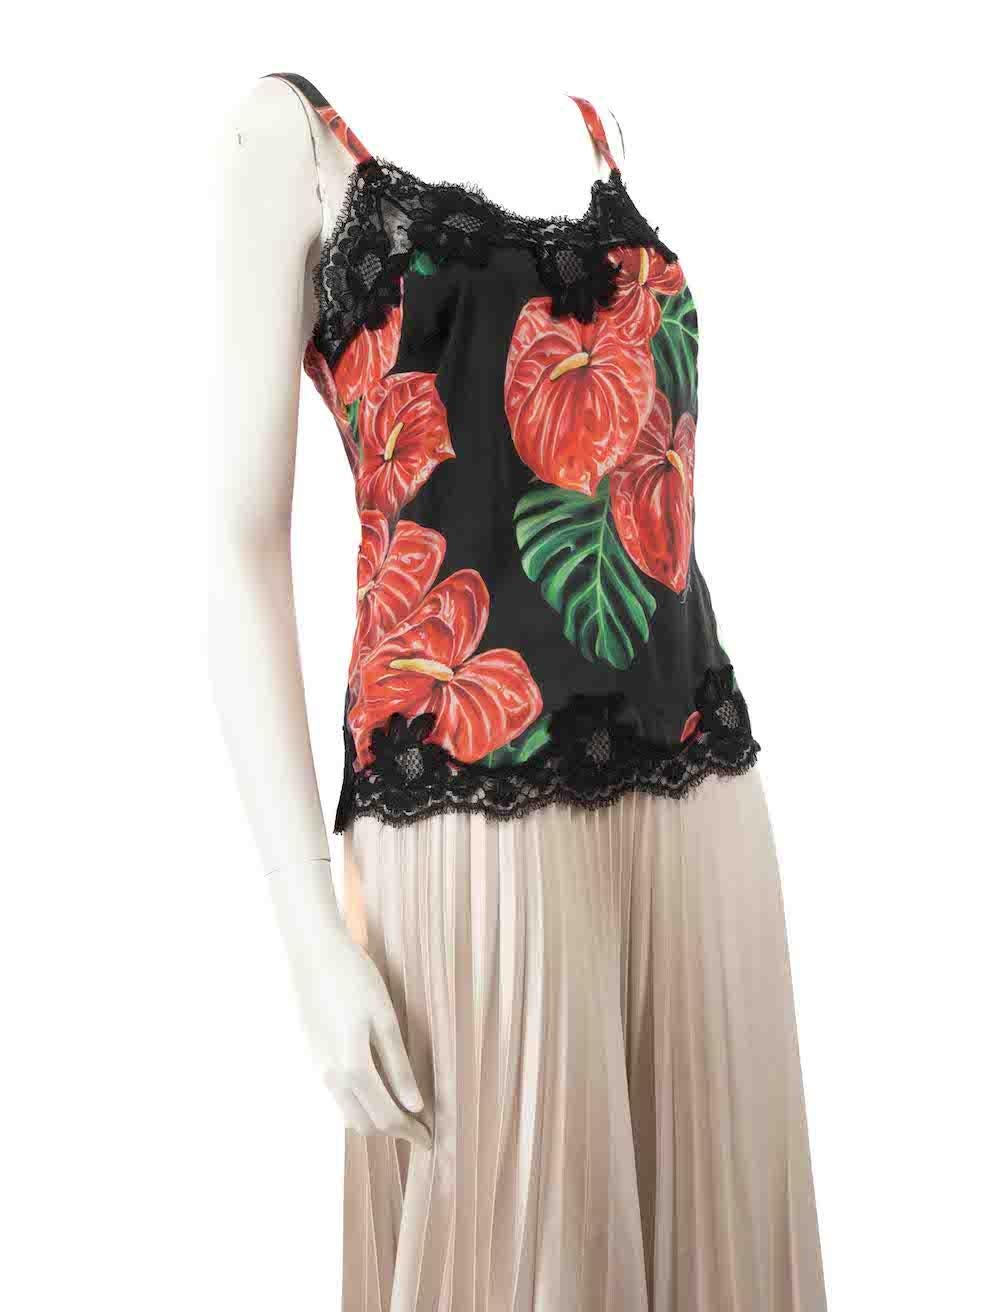 CONDITION is Good. Minor wear to top is evident. Light wear to lace trims where a number of stray thread ends can be seen on this used Dolce & Gabbana designer resale item.
 
 Details
 Multicolour- black and red
 Silk
 Tank top
 Floral print
 Black